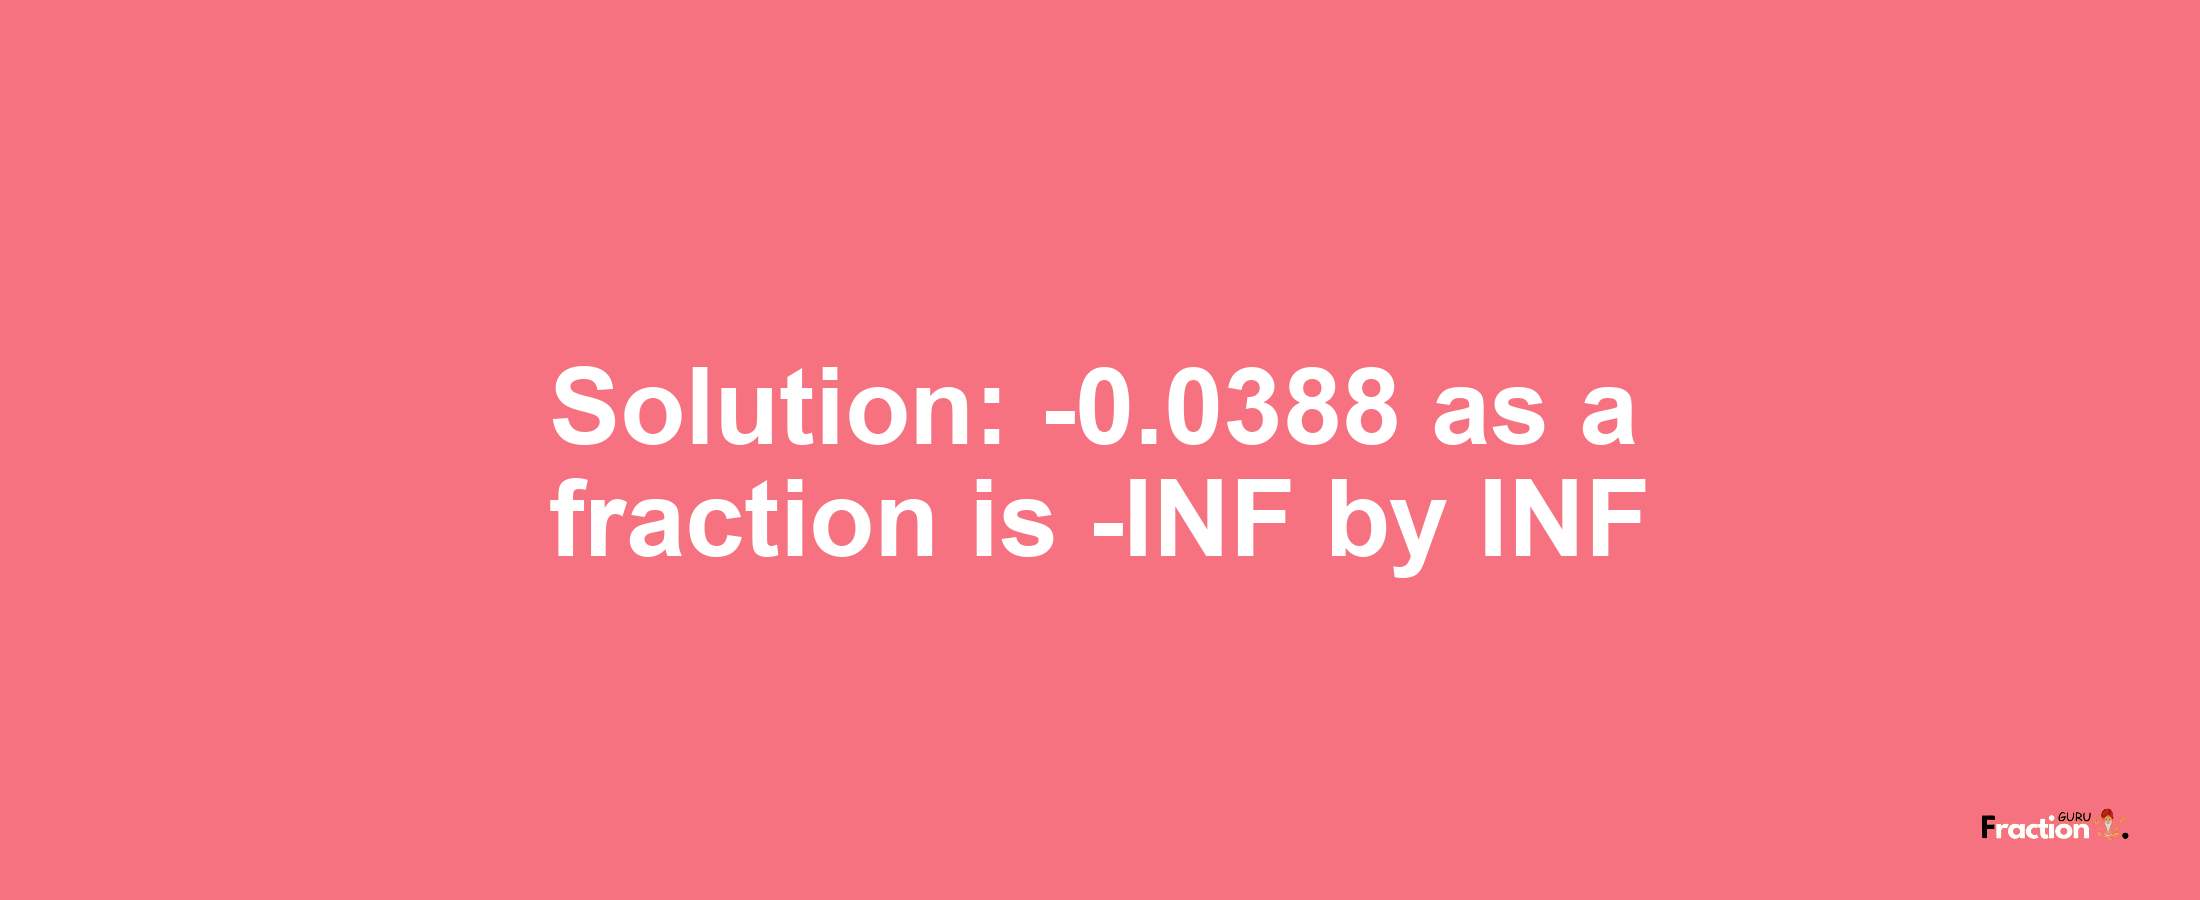 Solution:-0.0388 as a fraction is -INF/INF